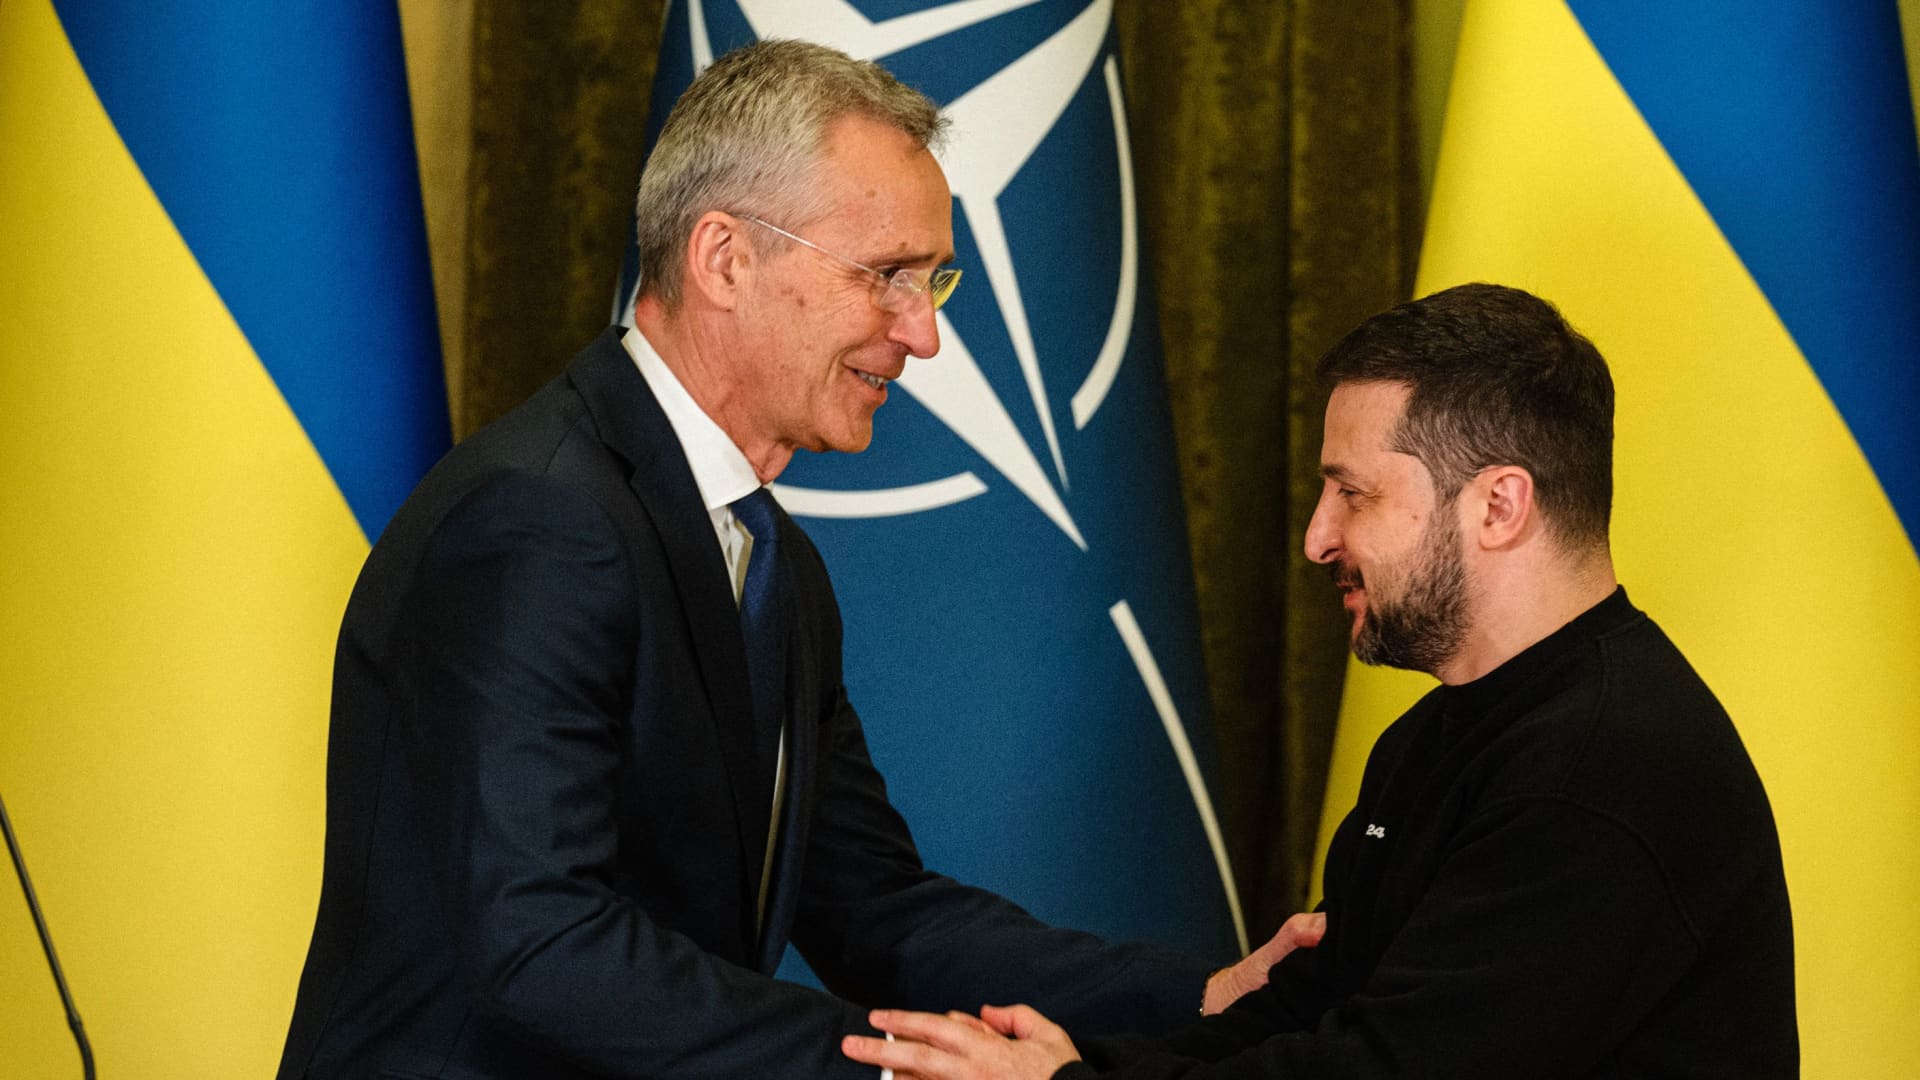 NATO head Jens Stoltenberg (L) shakes hands with Ukrainian President Volodymyr Zelenskyy at the end of a joint press conference in Kyiv, on April 20, 2023.